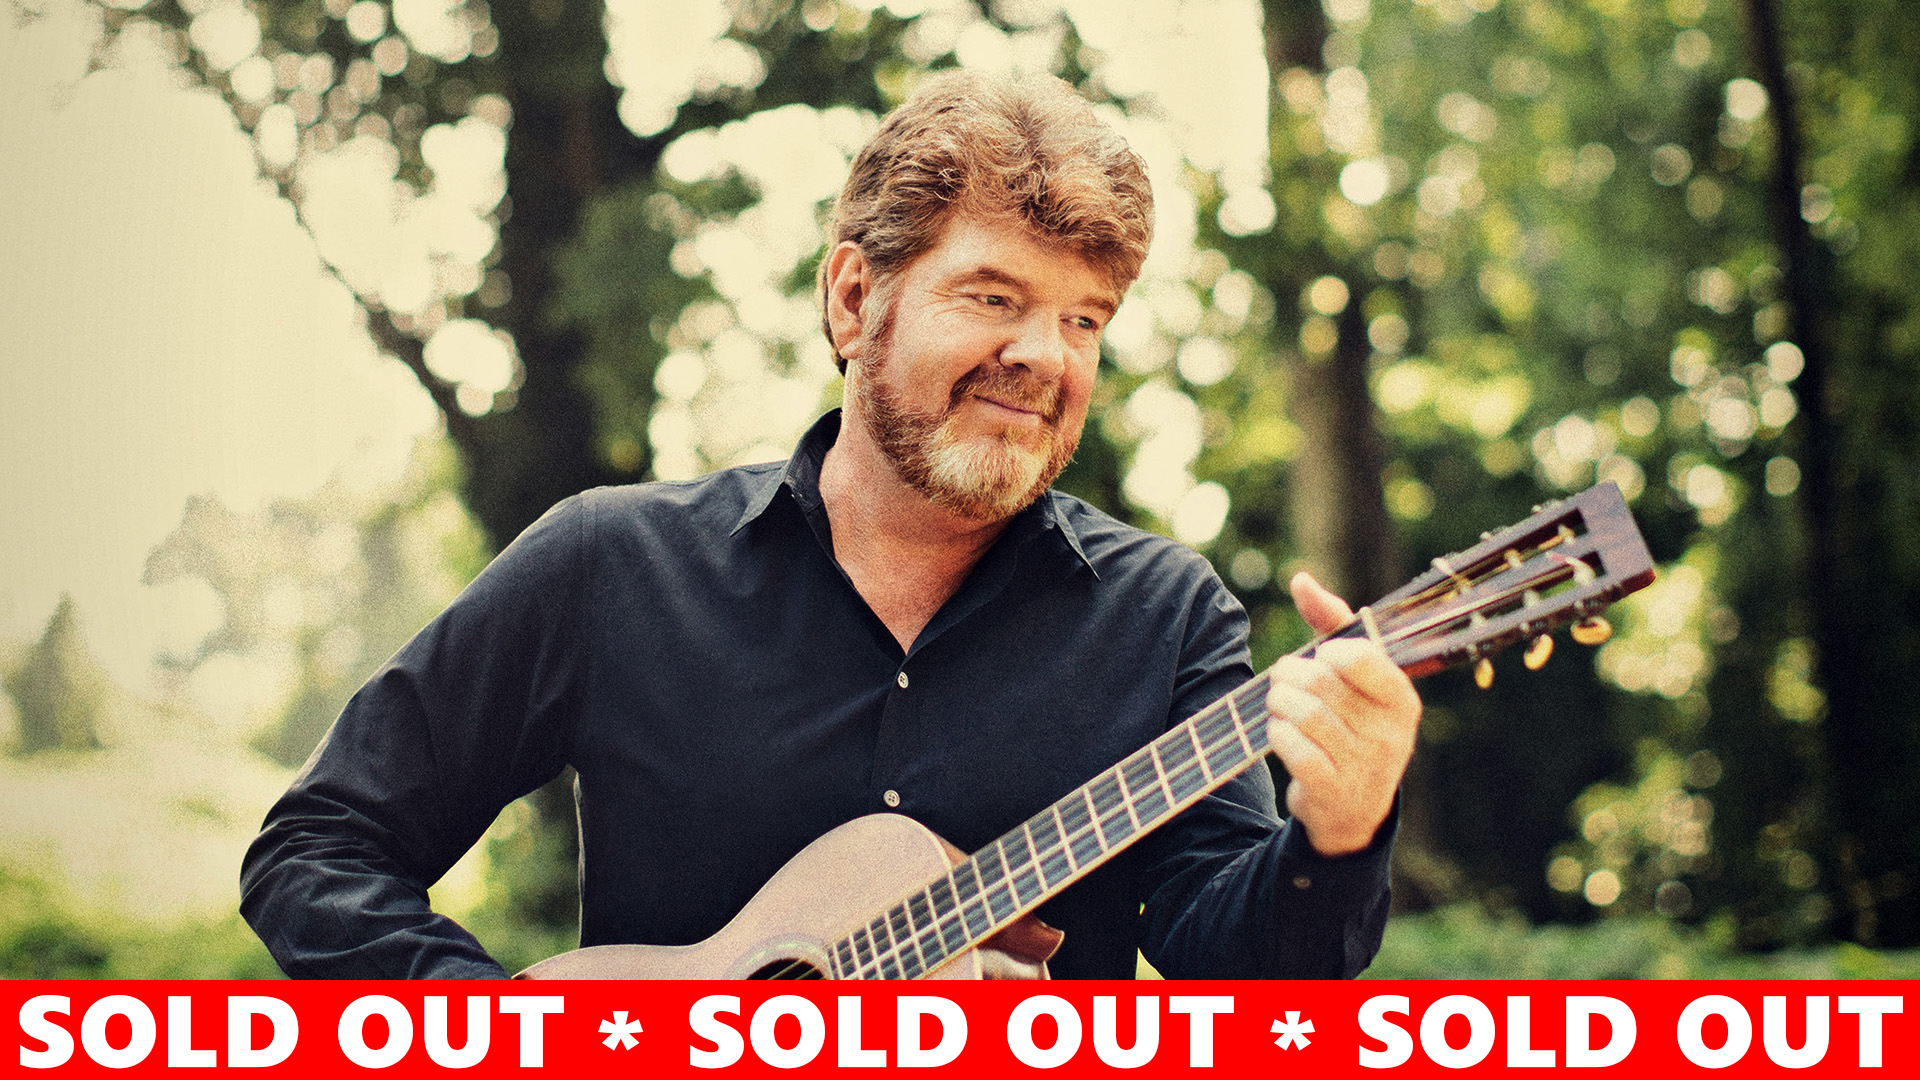 Mac McAnally 1920 x 1080 SOLD OUT